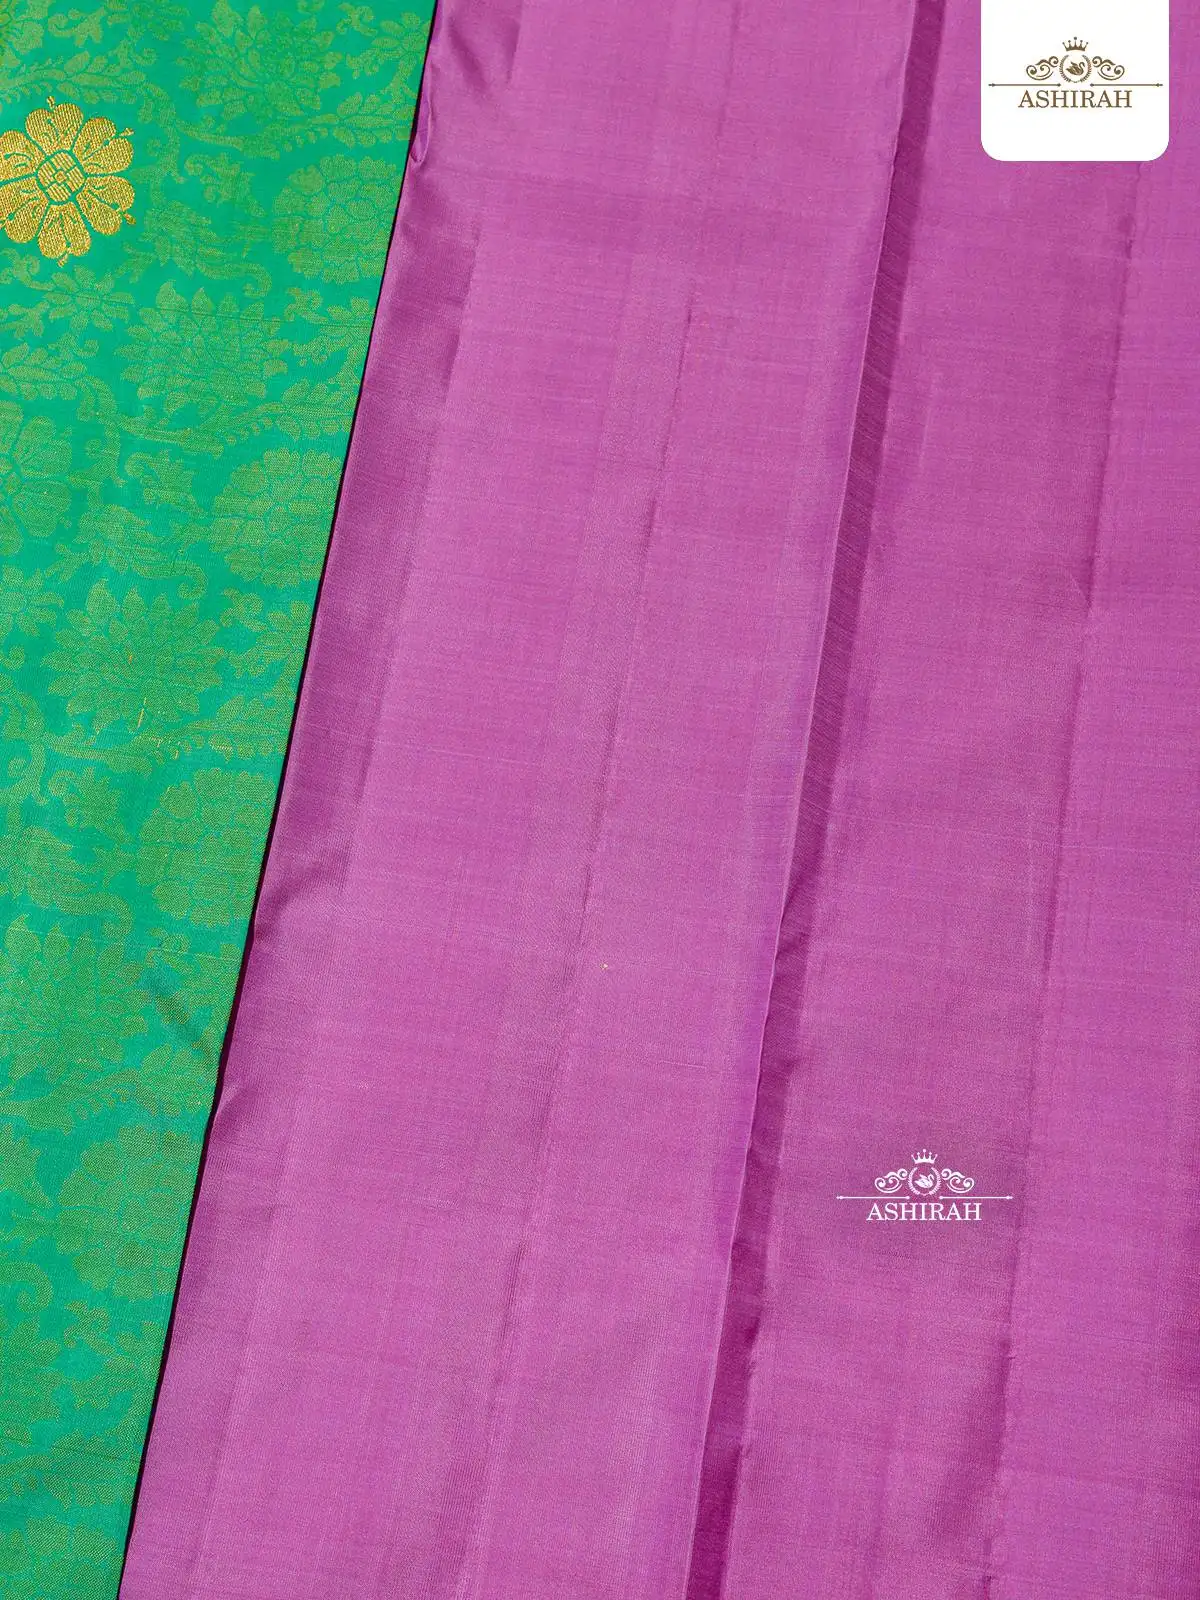 Green Pure Kanchipuram Silk Saree With Brocade And Flower Motifs All Over The Body And Without Border